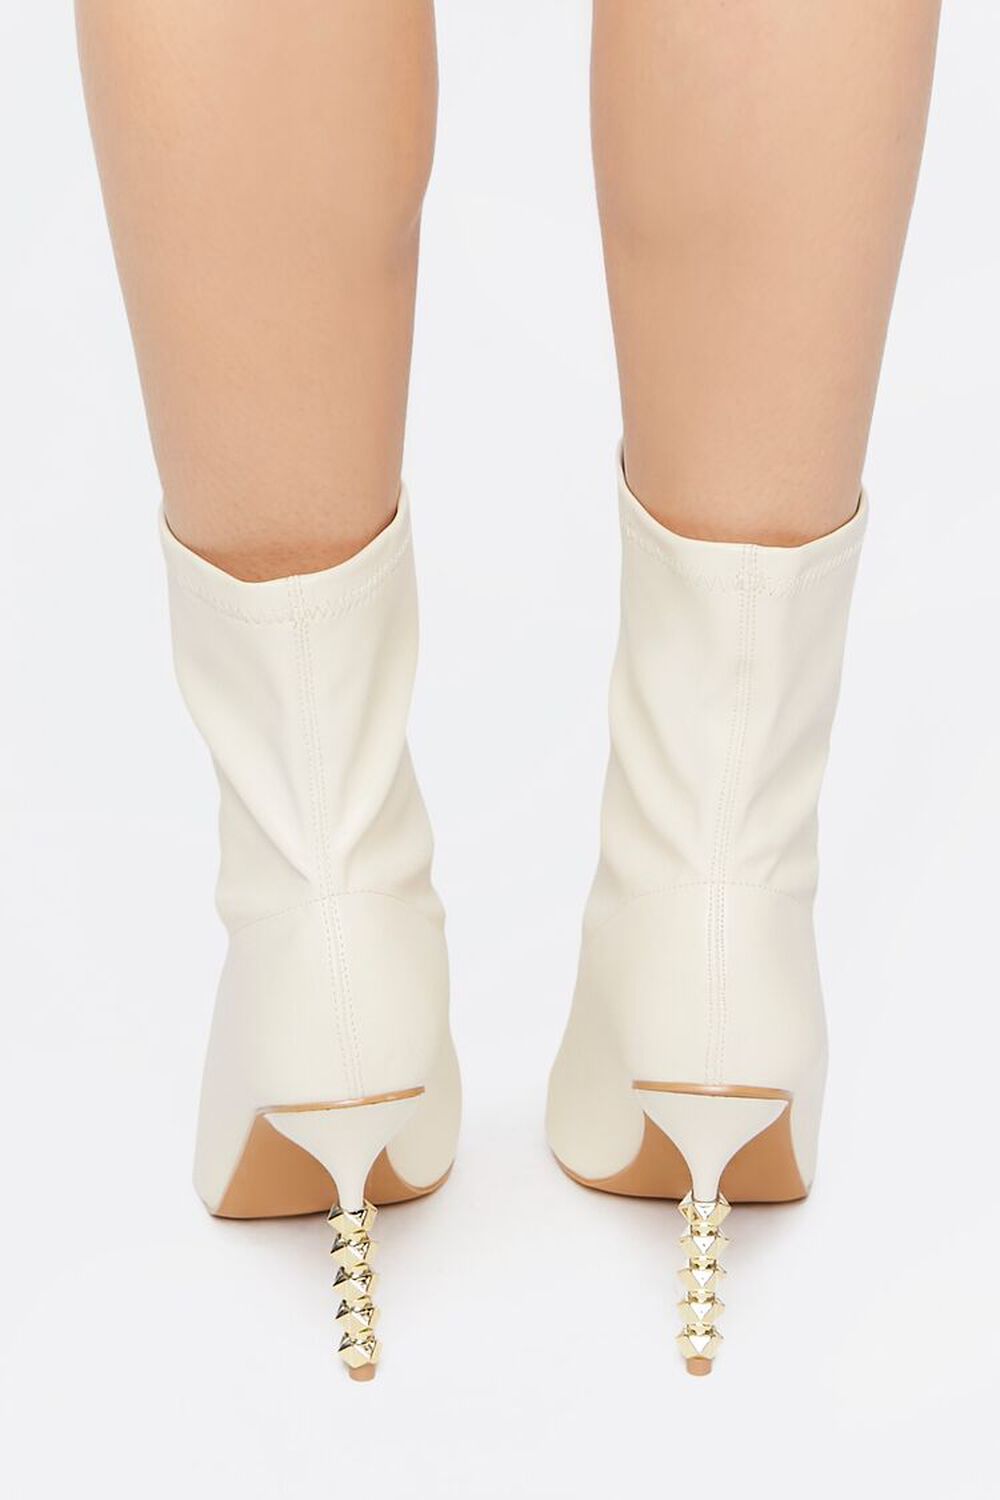 WHITE Faux Leather Studded Heel Booties, image 3